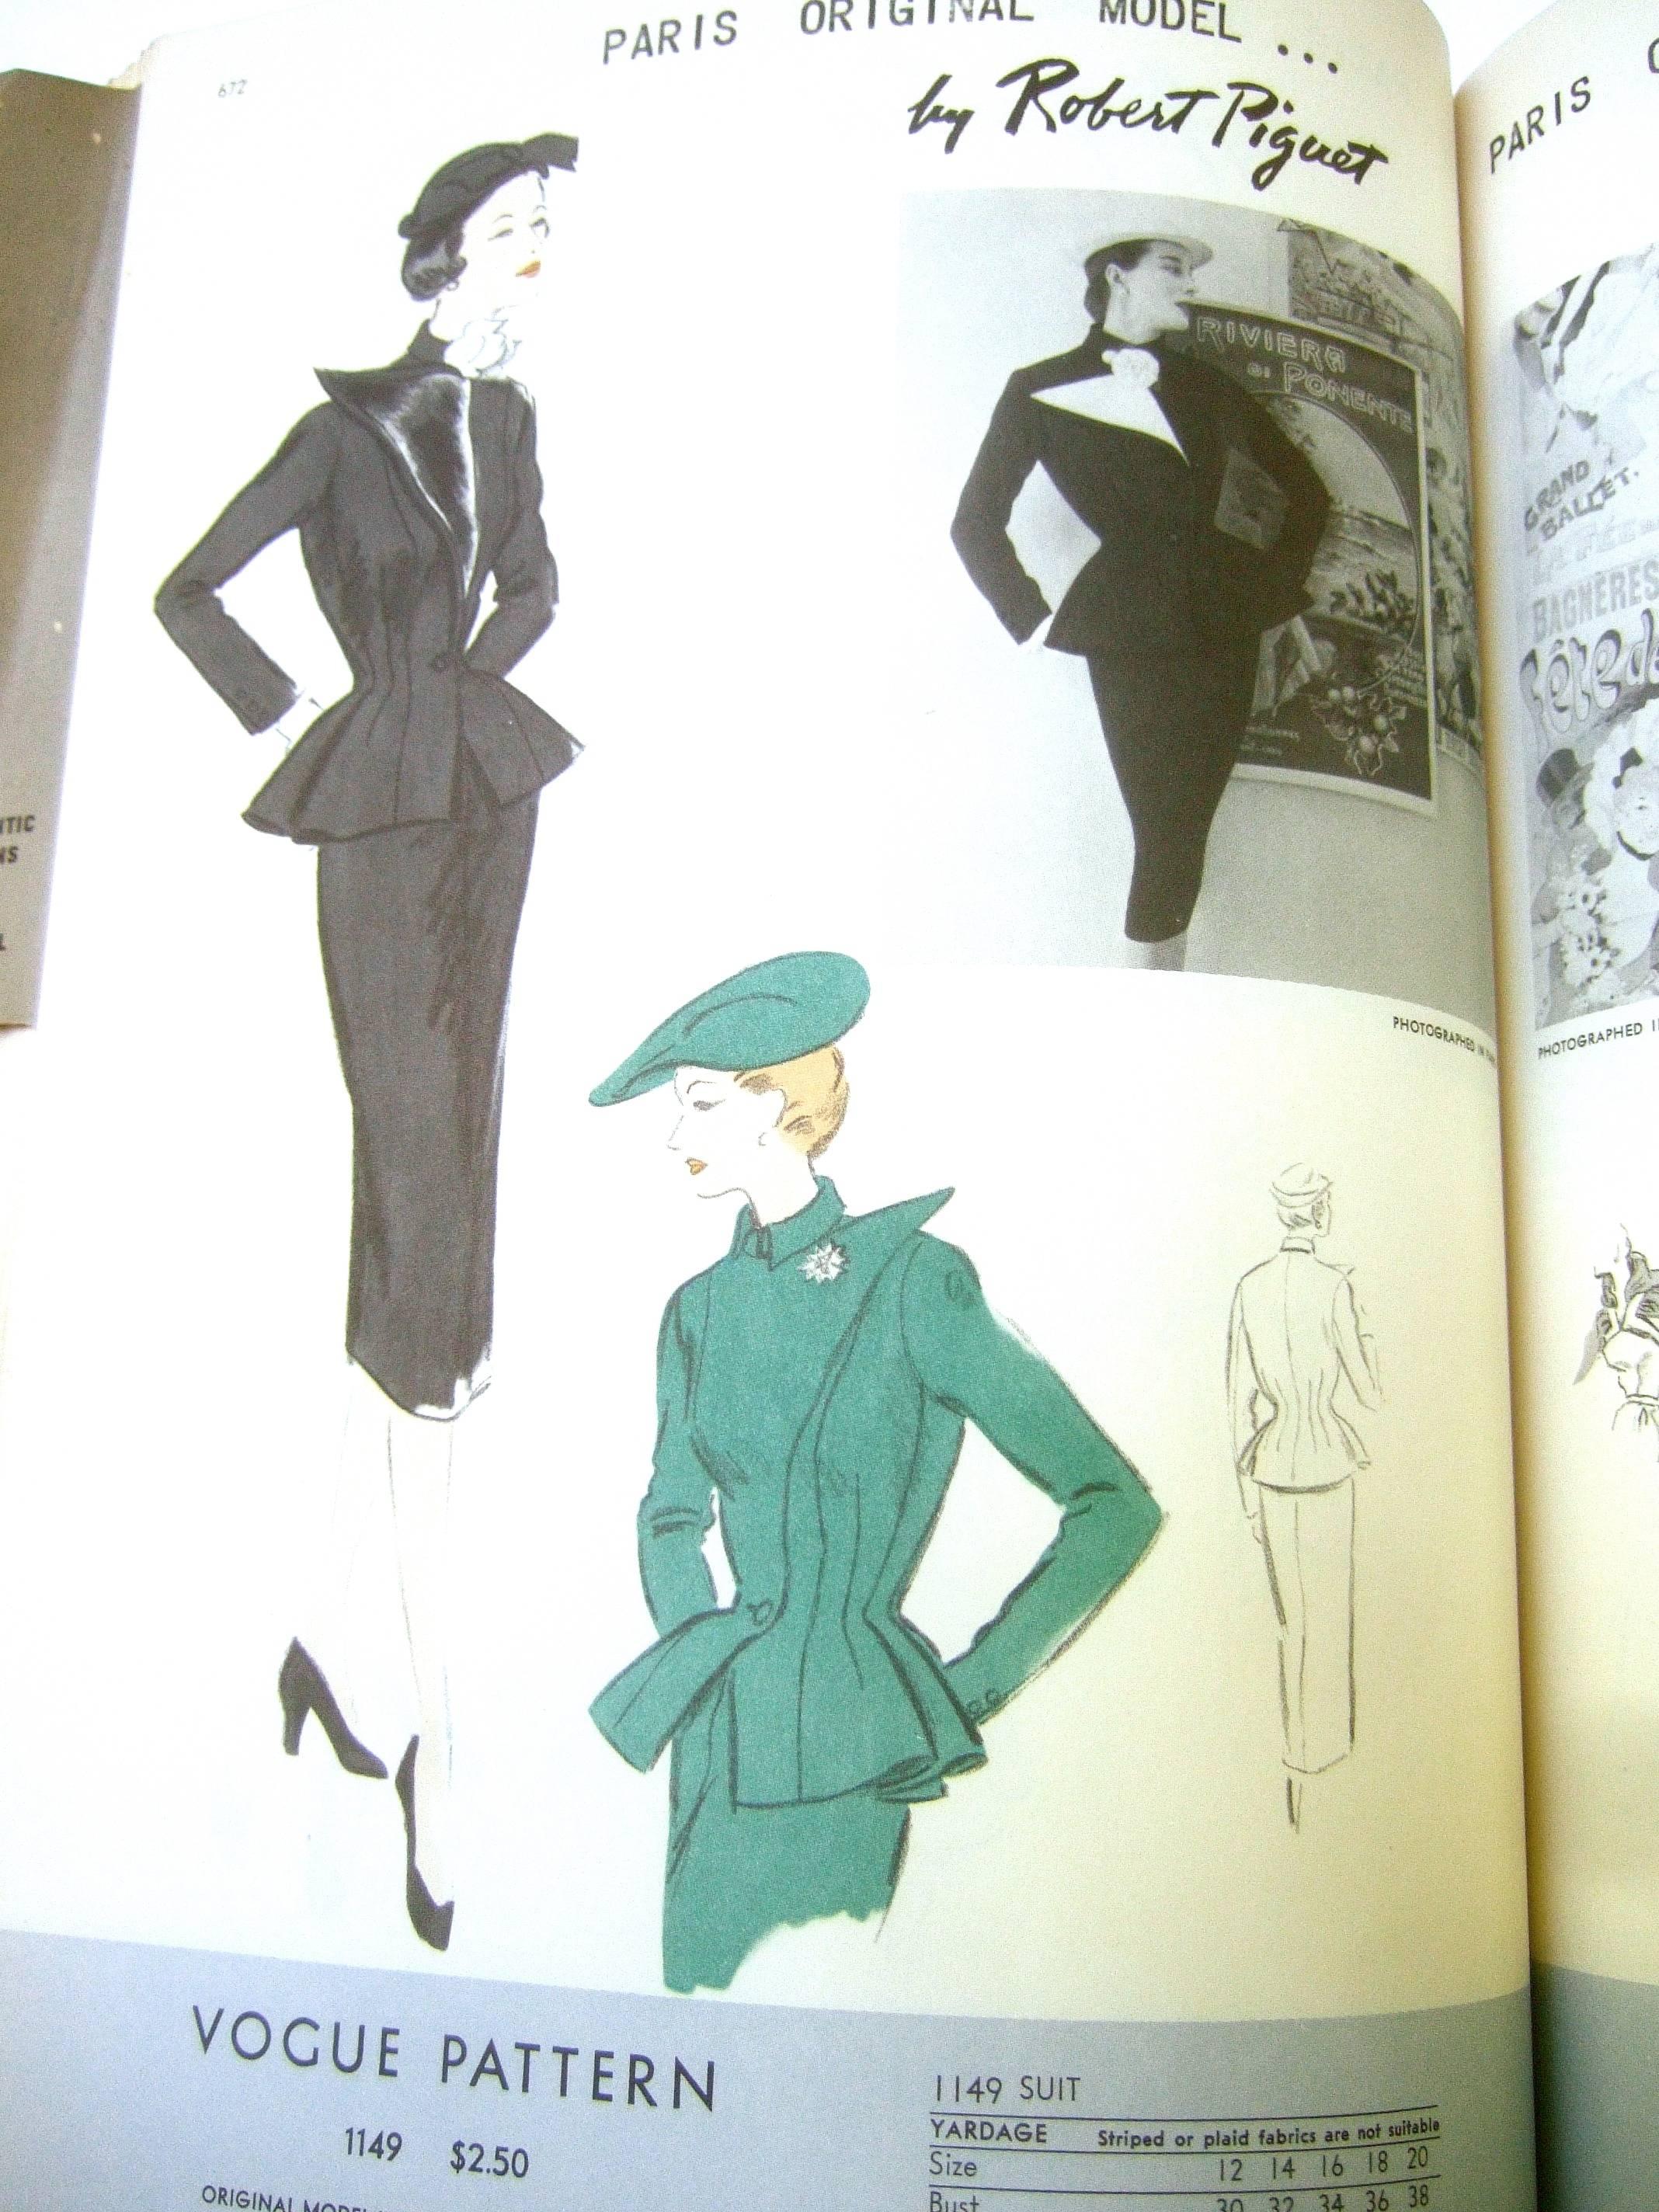 1952 Vogue Pattern Book with French Couture Illustrations   1